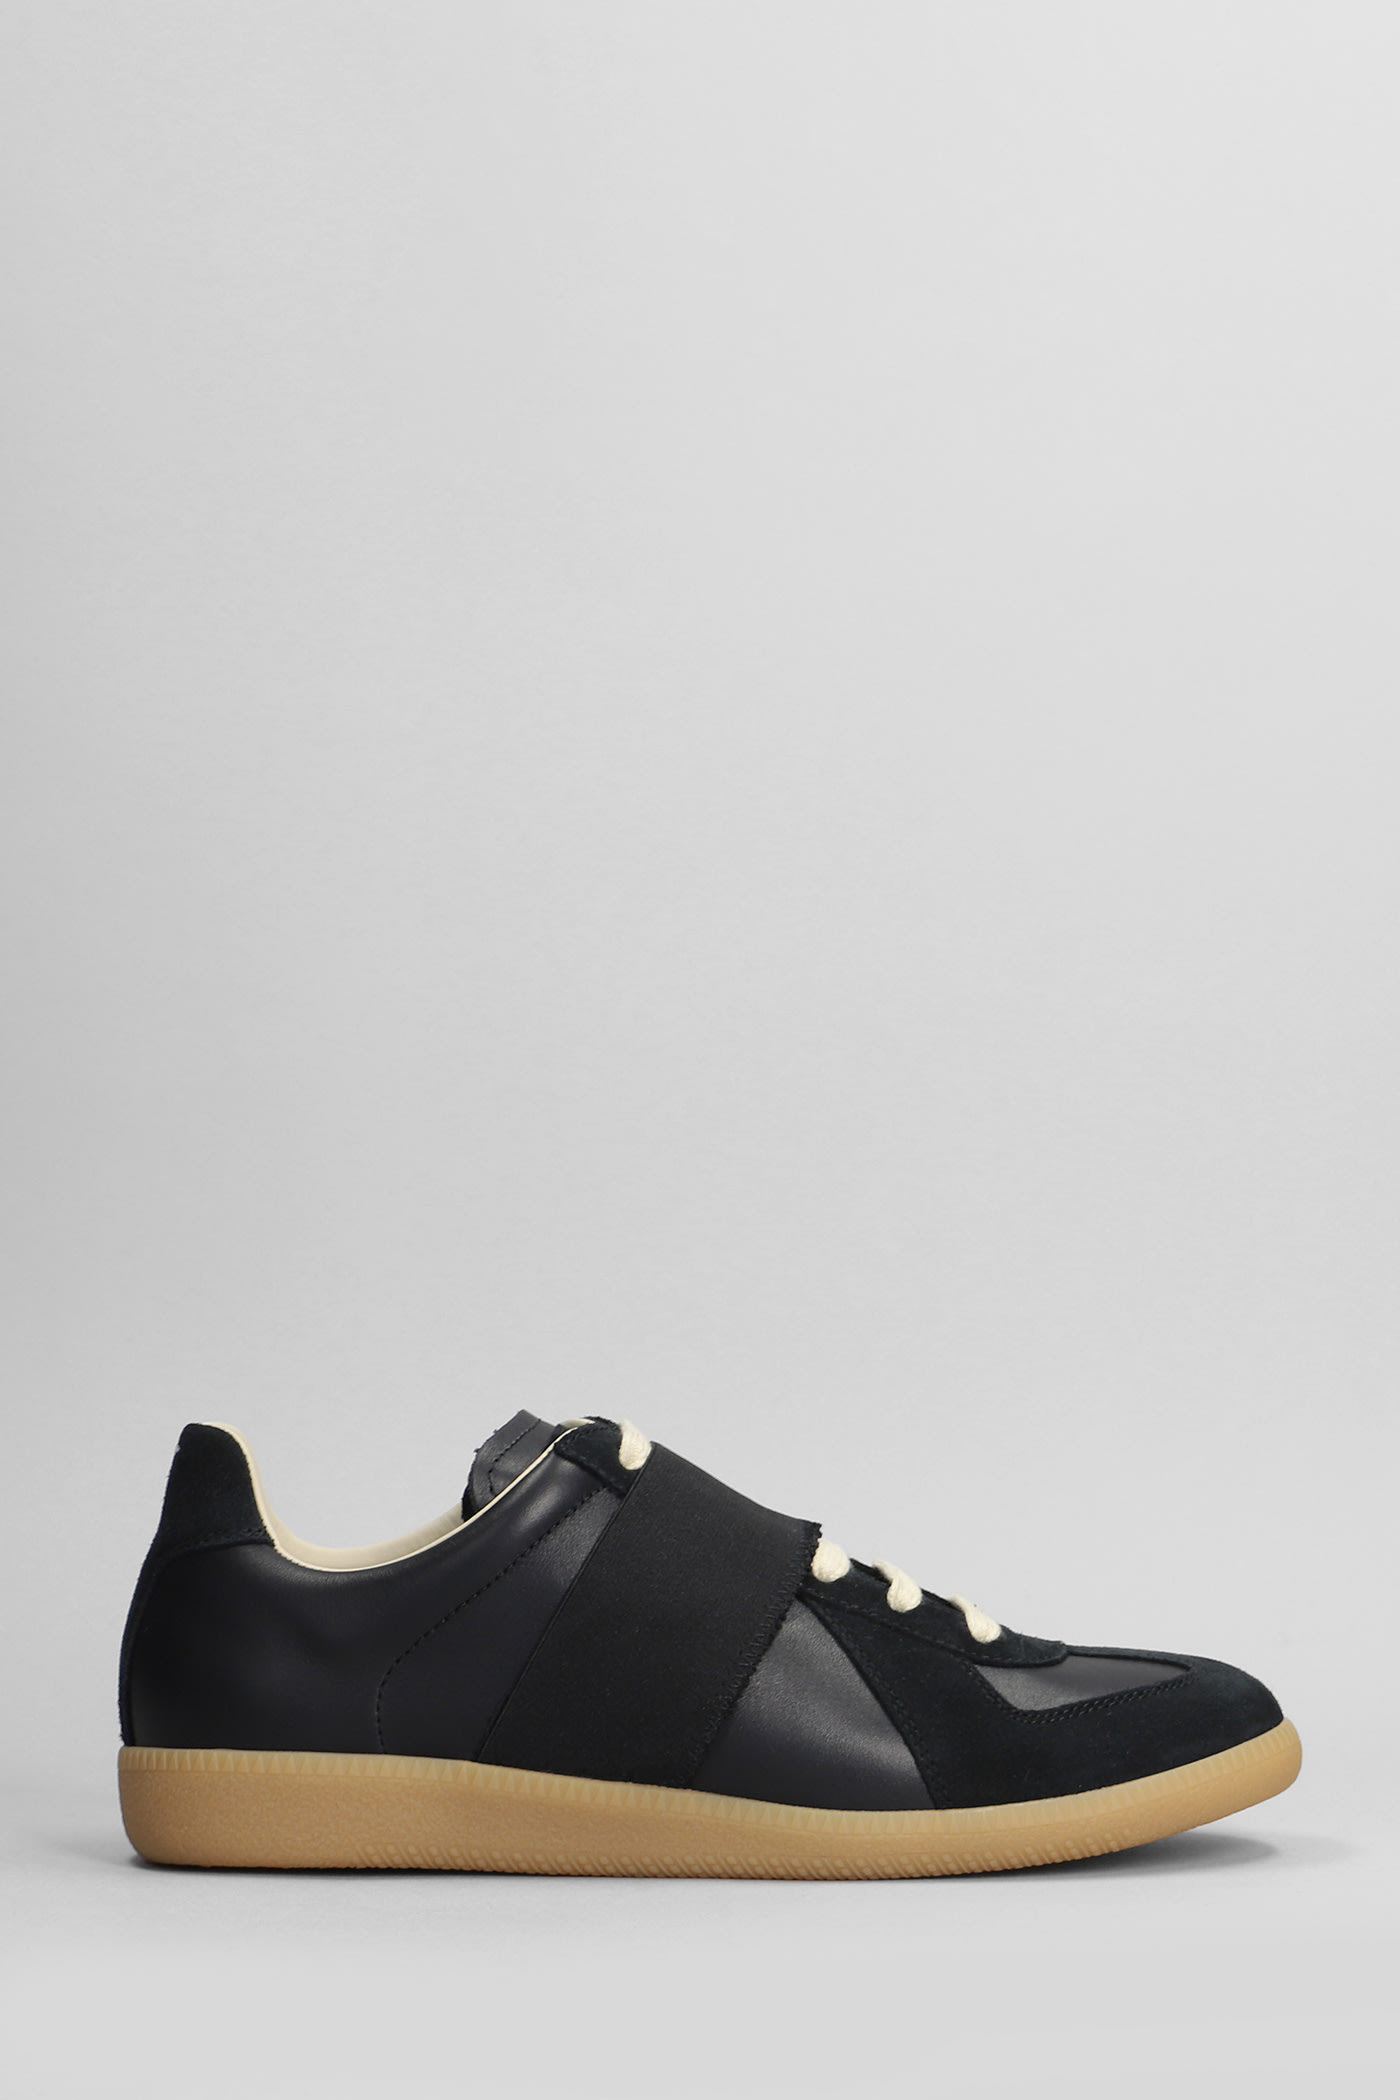 Replica Sneakers In Black Suede And Leather